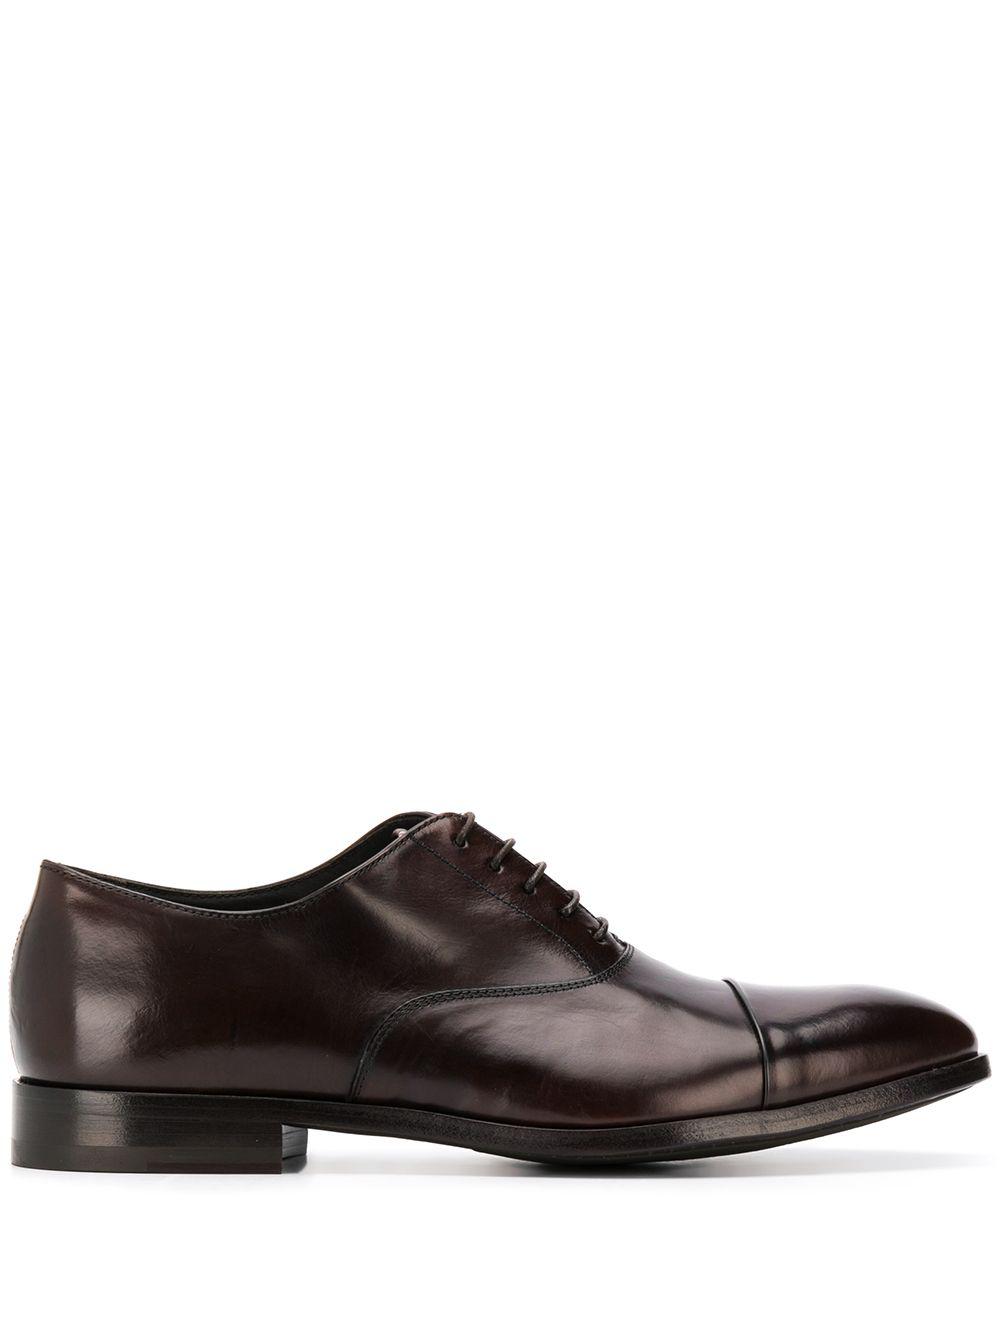 lace-up oxford shoes by PAUL SMITH